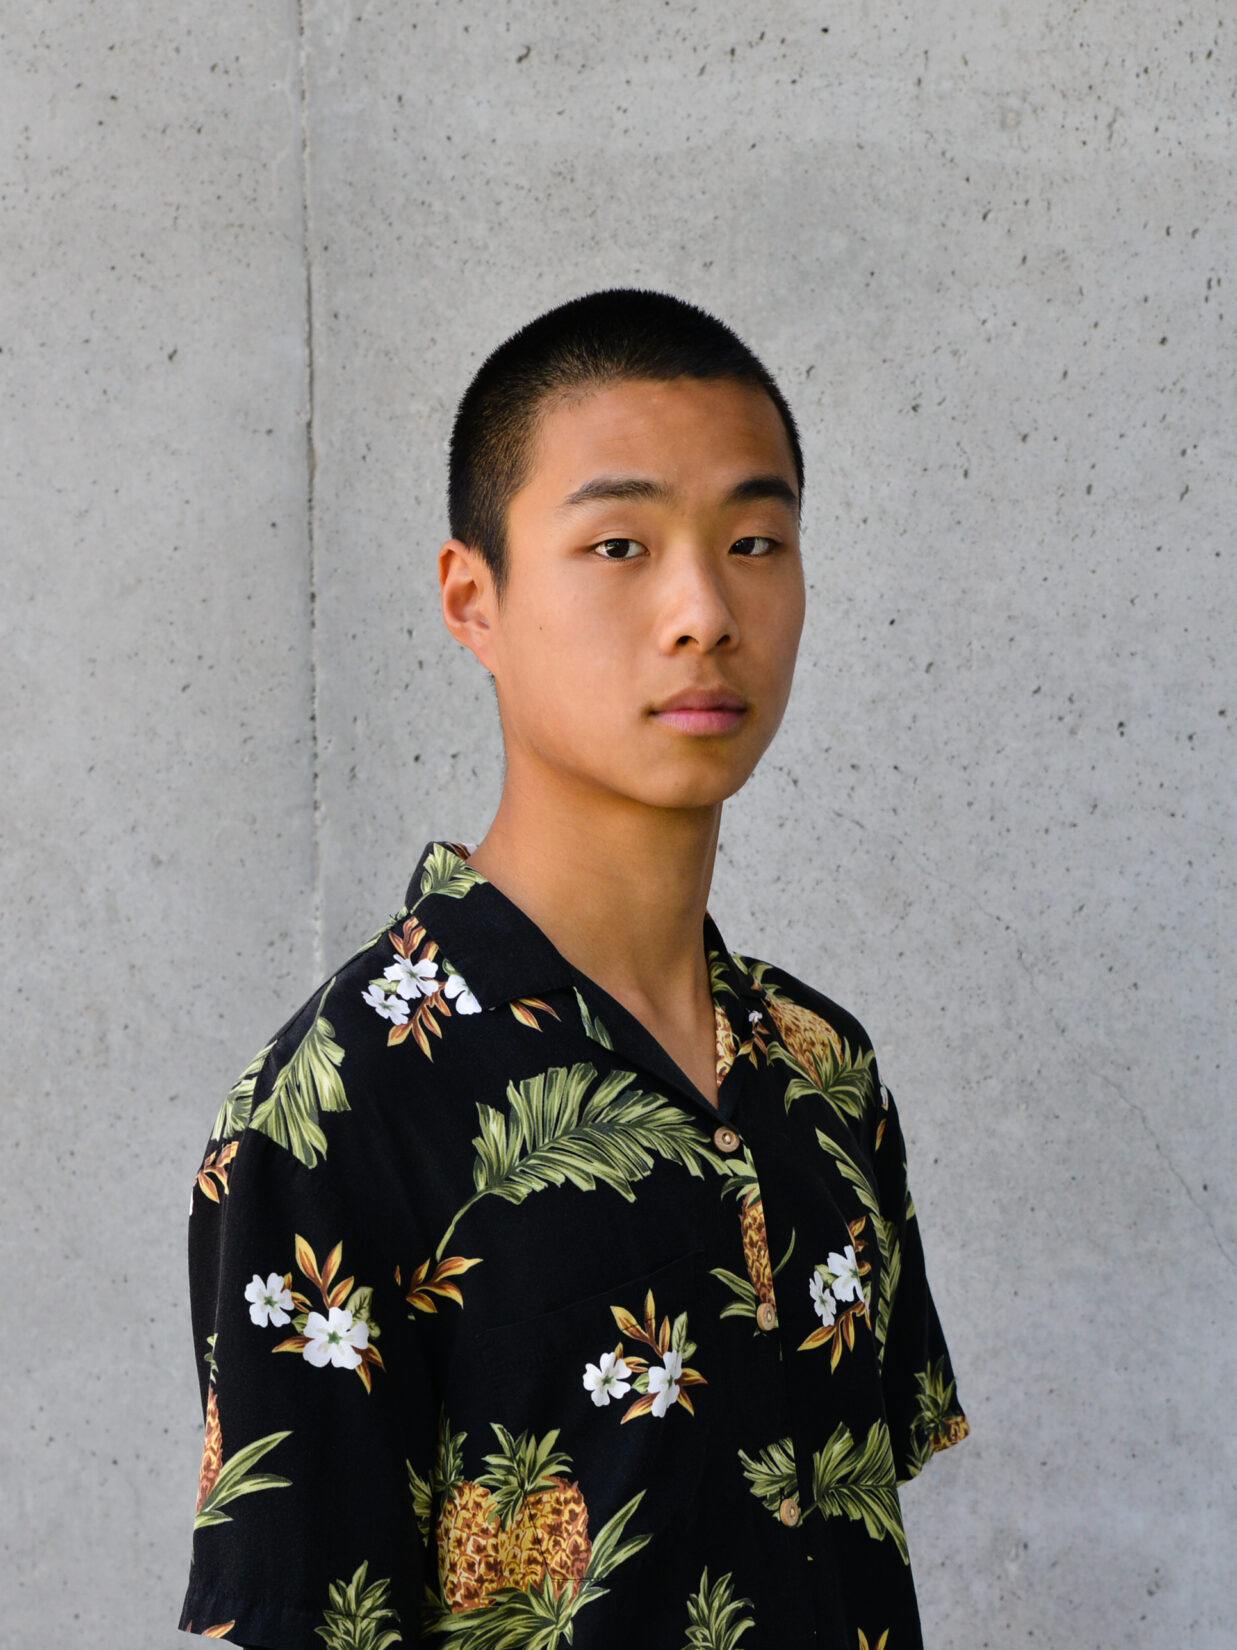 Headshot of Alger Liang. He's wearing a printed shirt which stands out starkly against the concrete wall behind him. Expressionless, there is a certain vulnerability in the length of his neck and his close cropped hair.